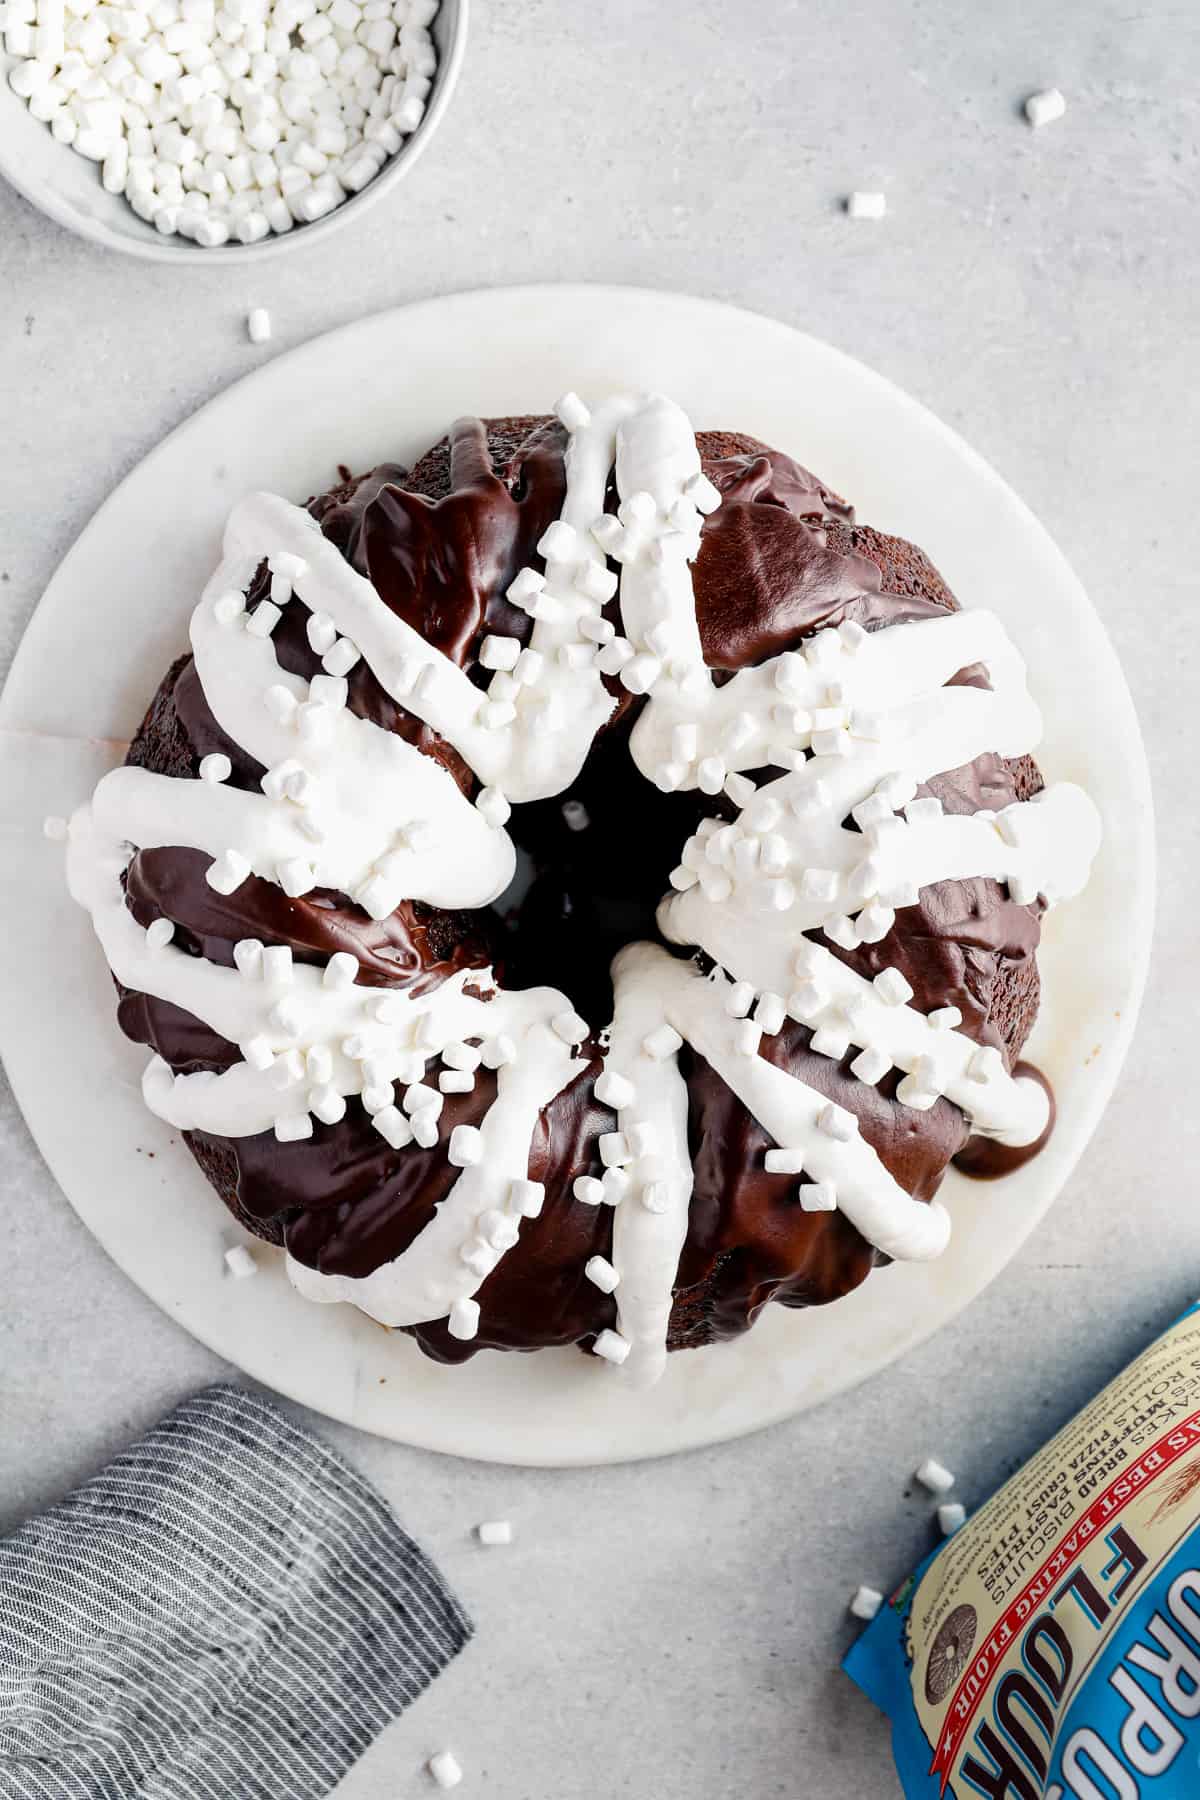 24 of the Best Bundt Pans to Add to Your Collection [2022]